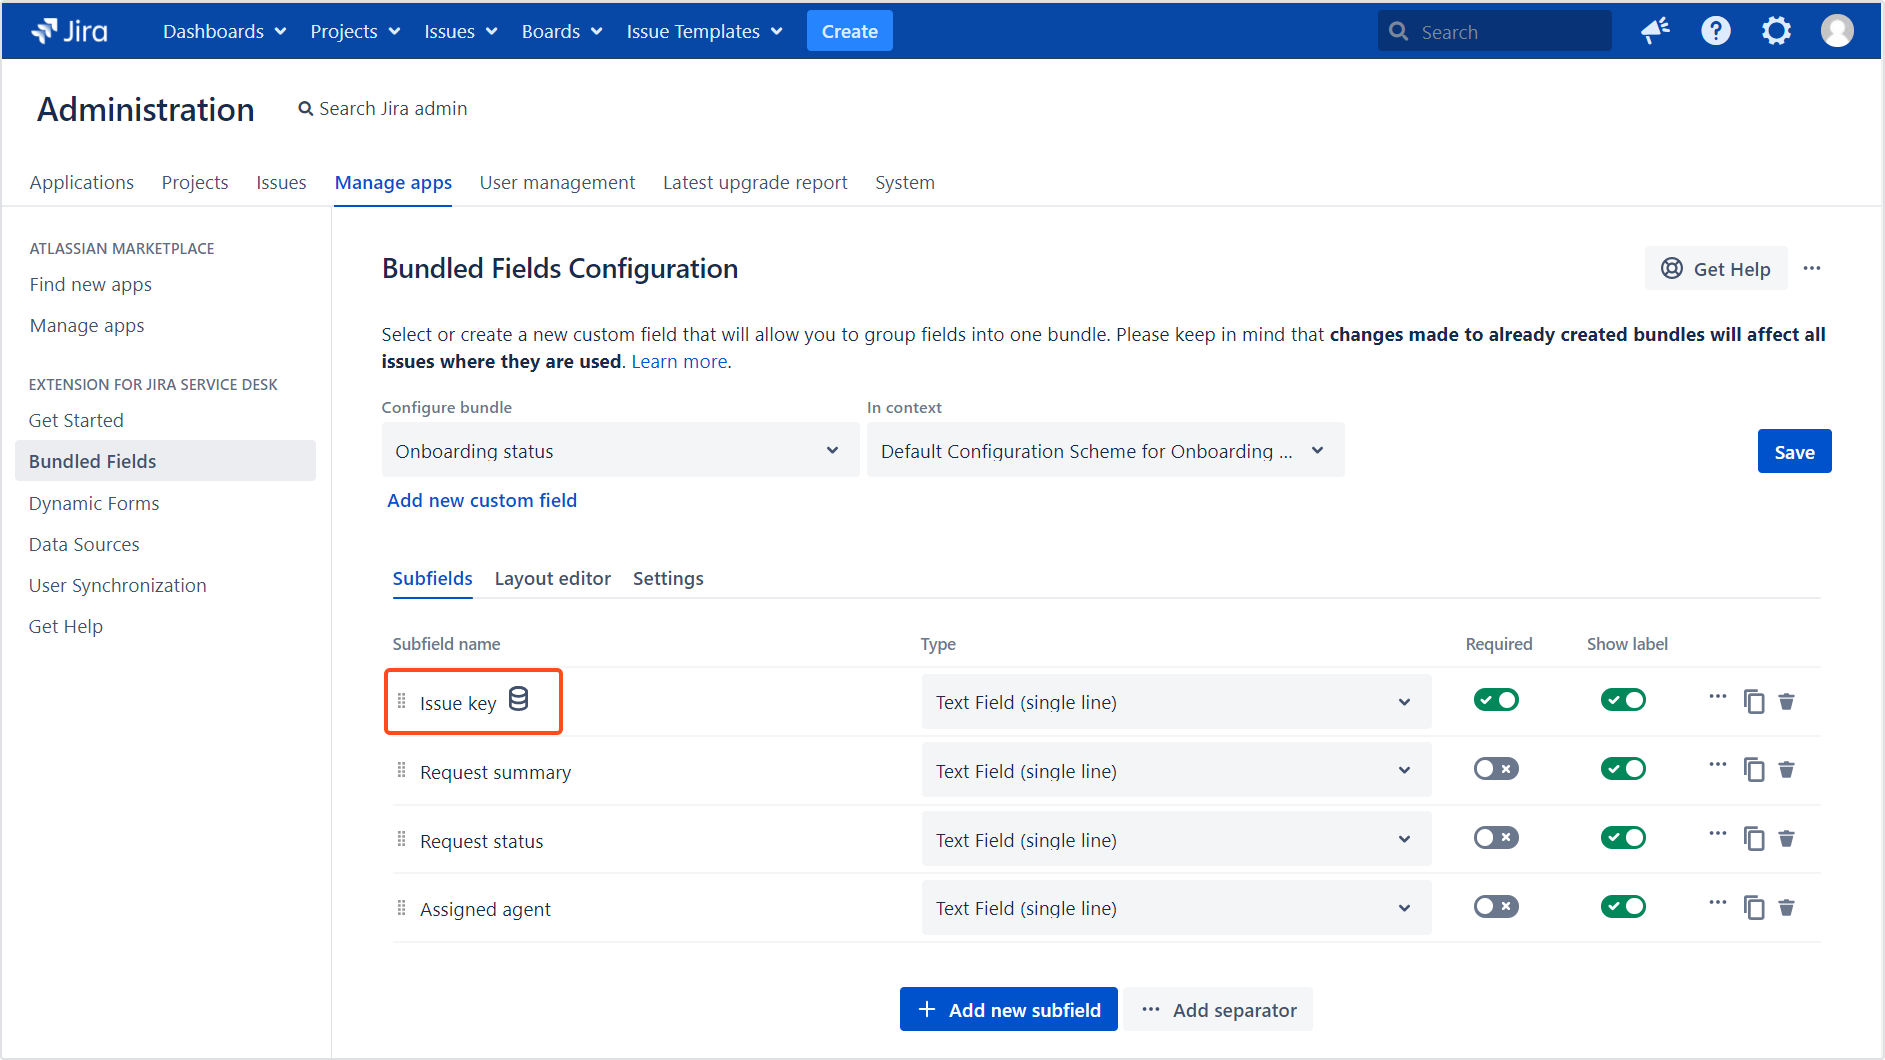 Extension for Jira Service Management - Bundled Fields Data Sources: Connected subfield